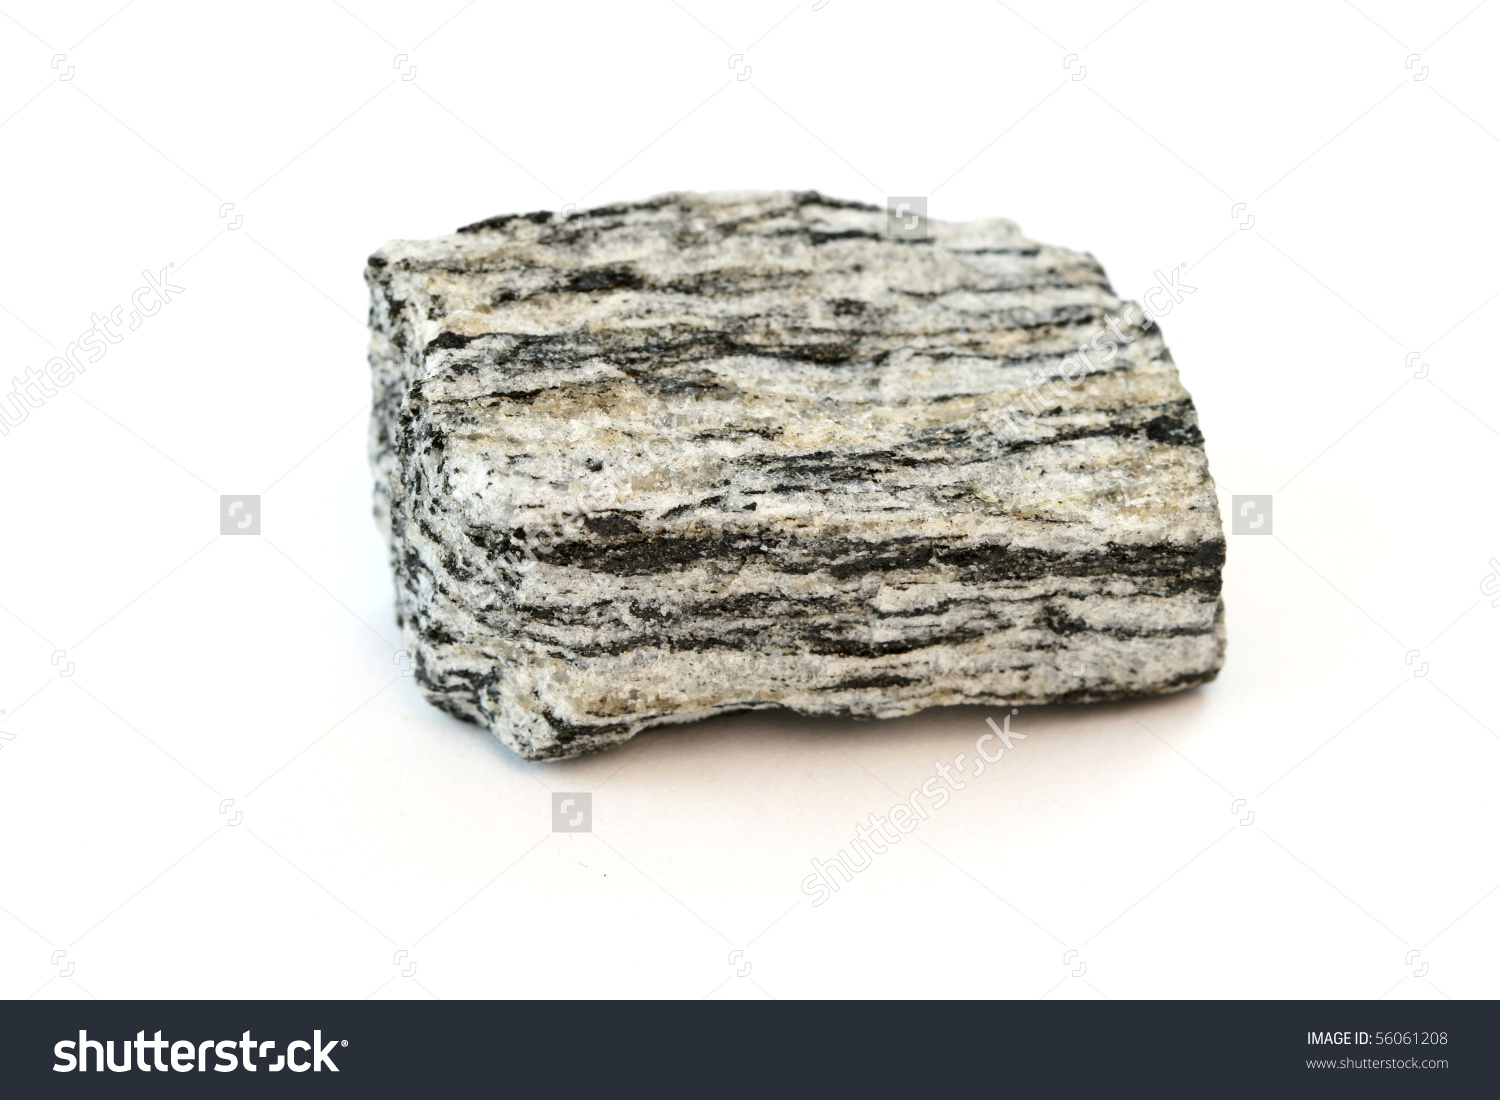 Isolated Sample Rock Gneiss Stock Photo 56061208.